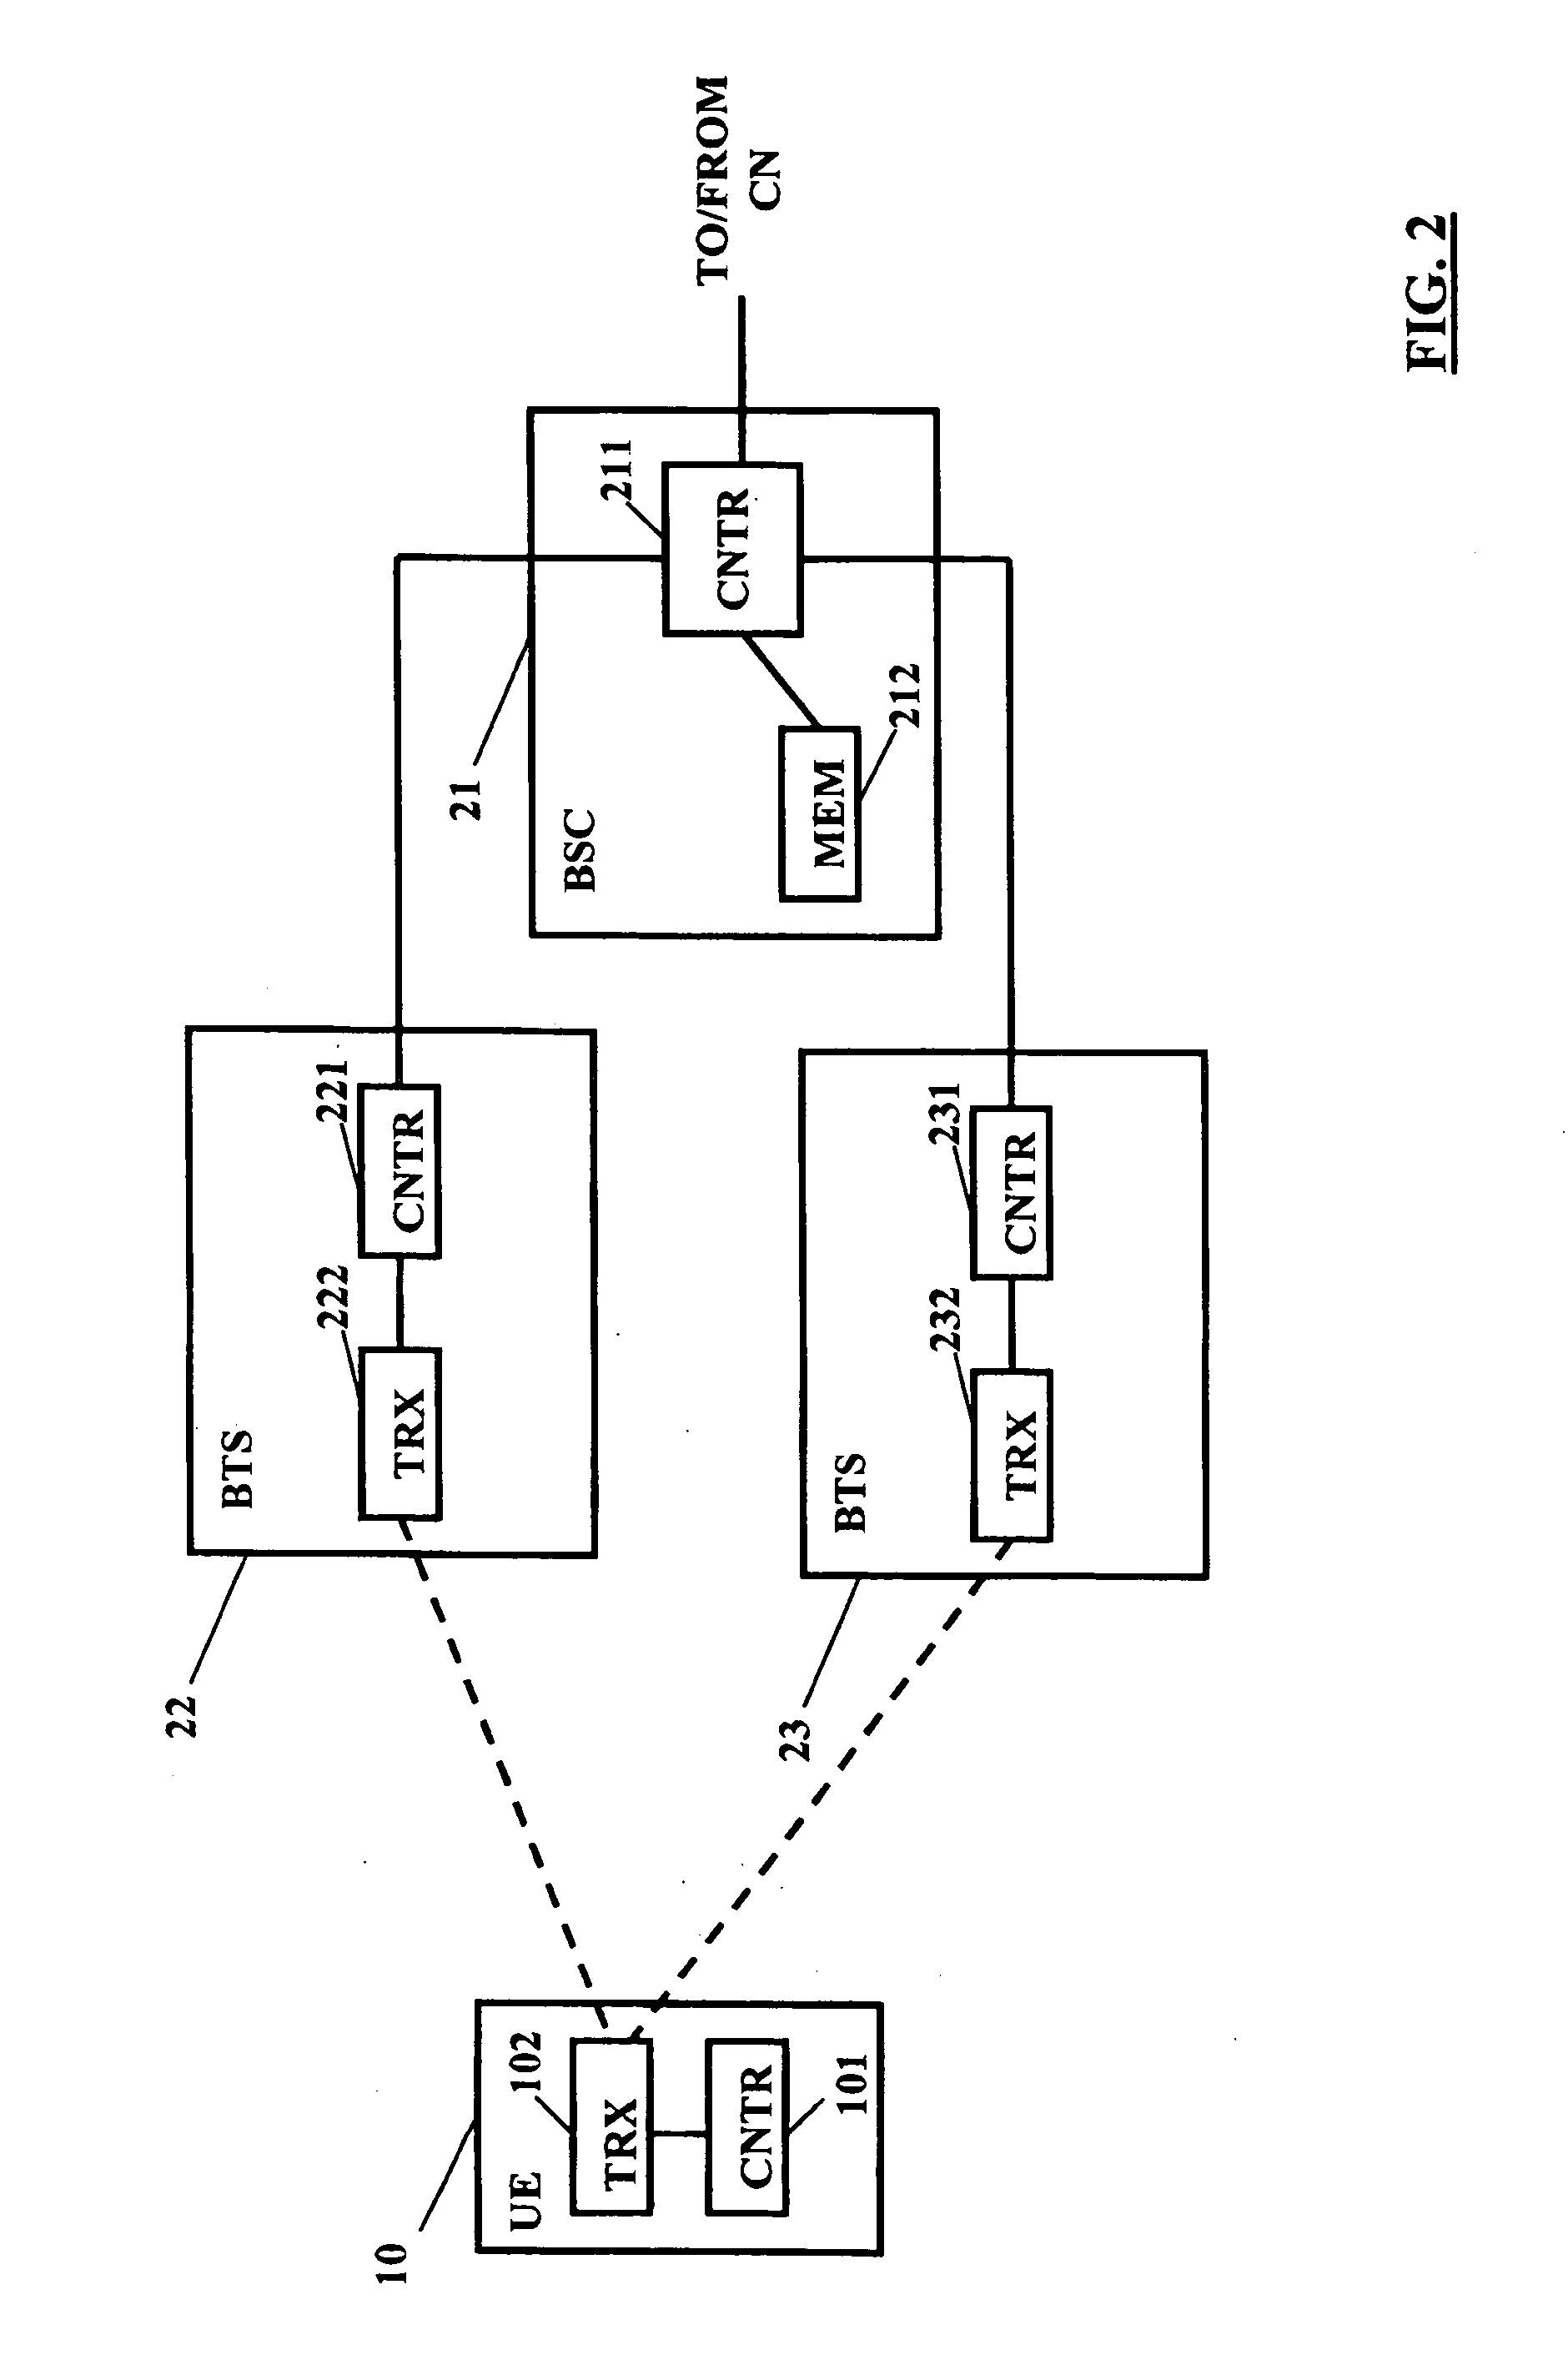 Power control in a communication network